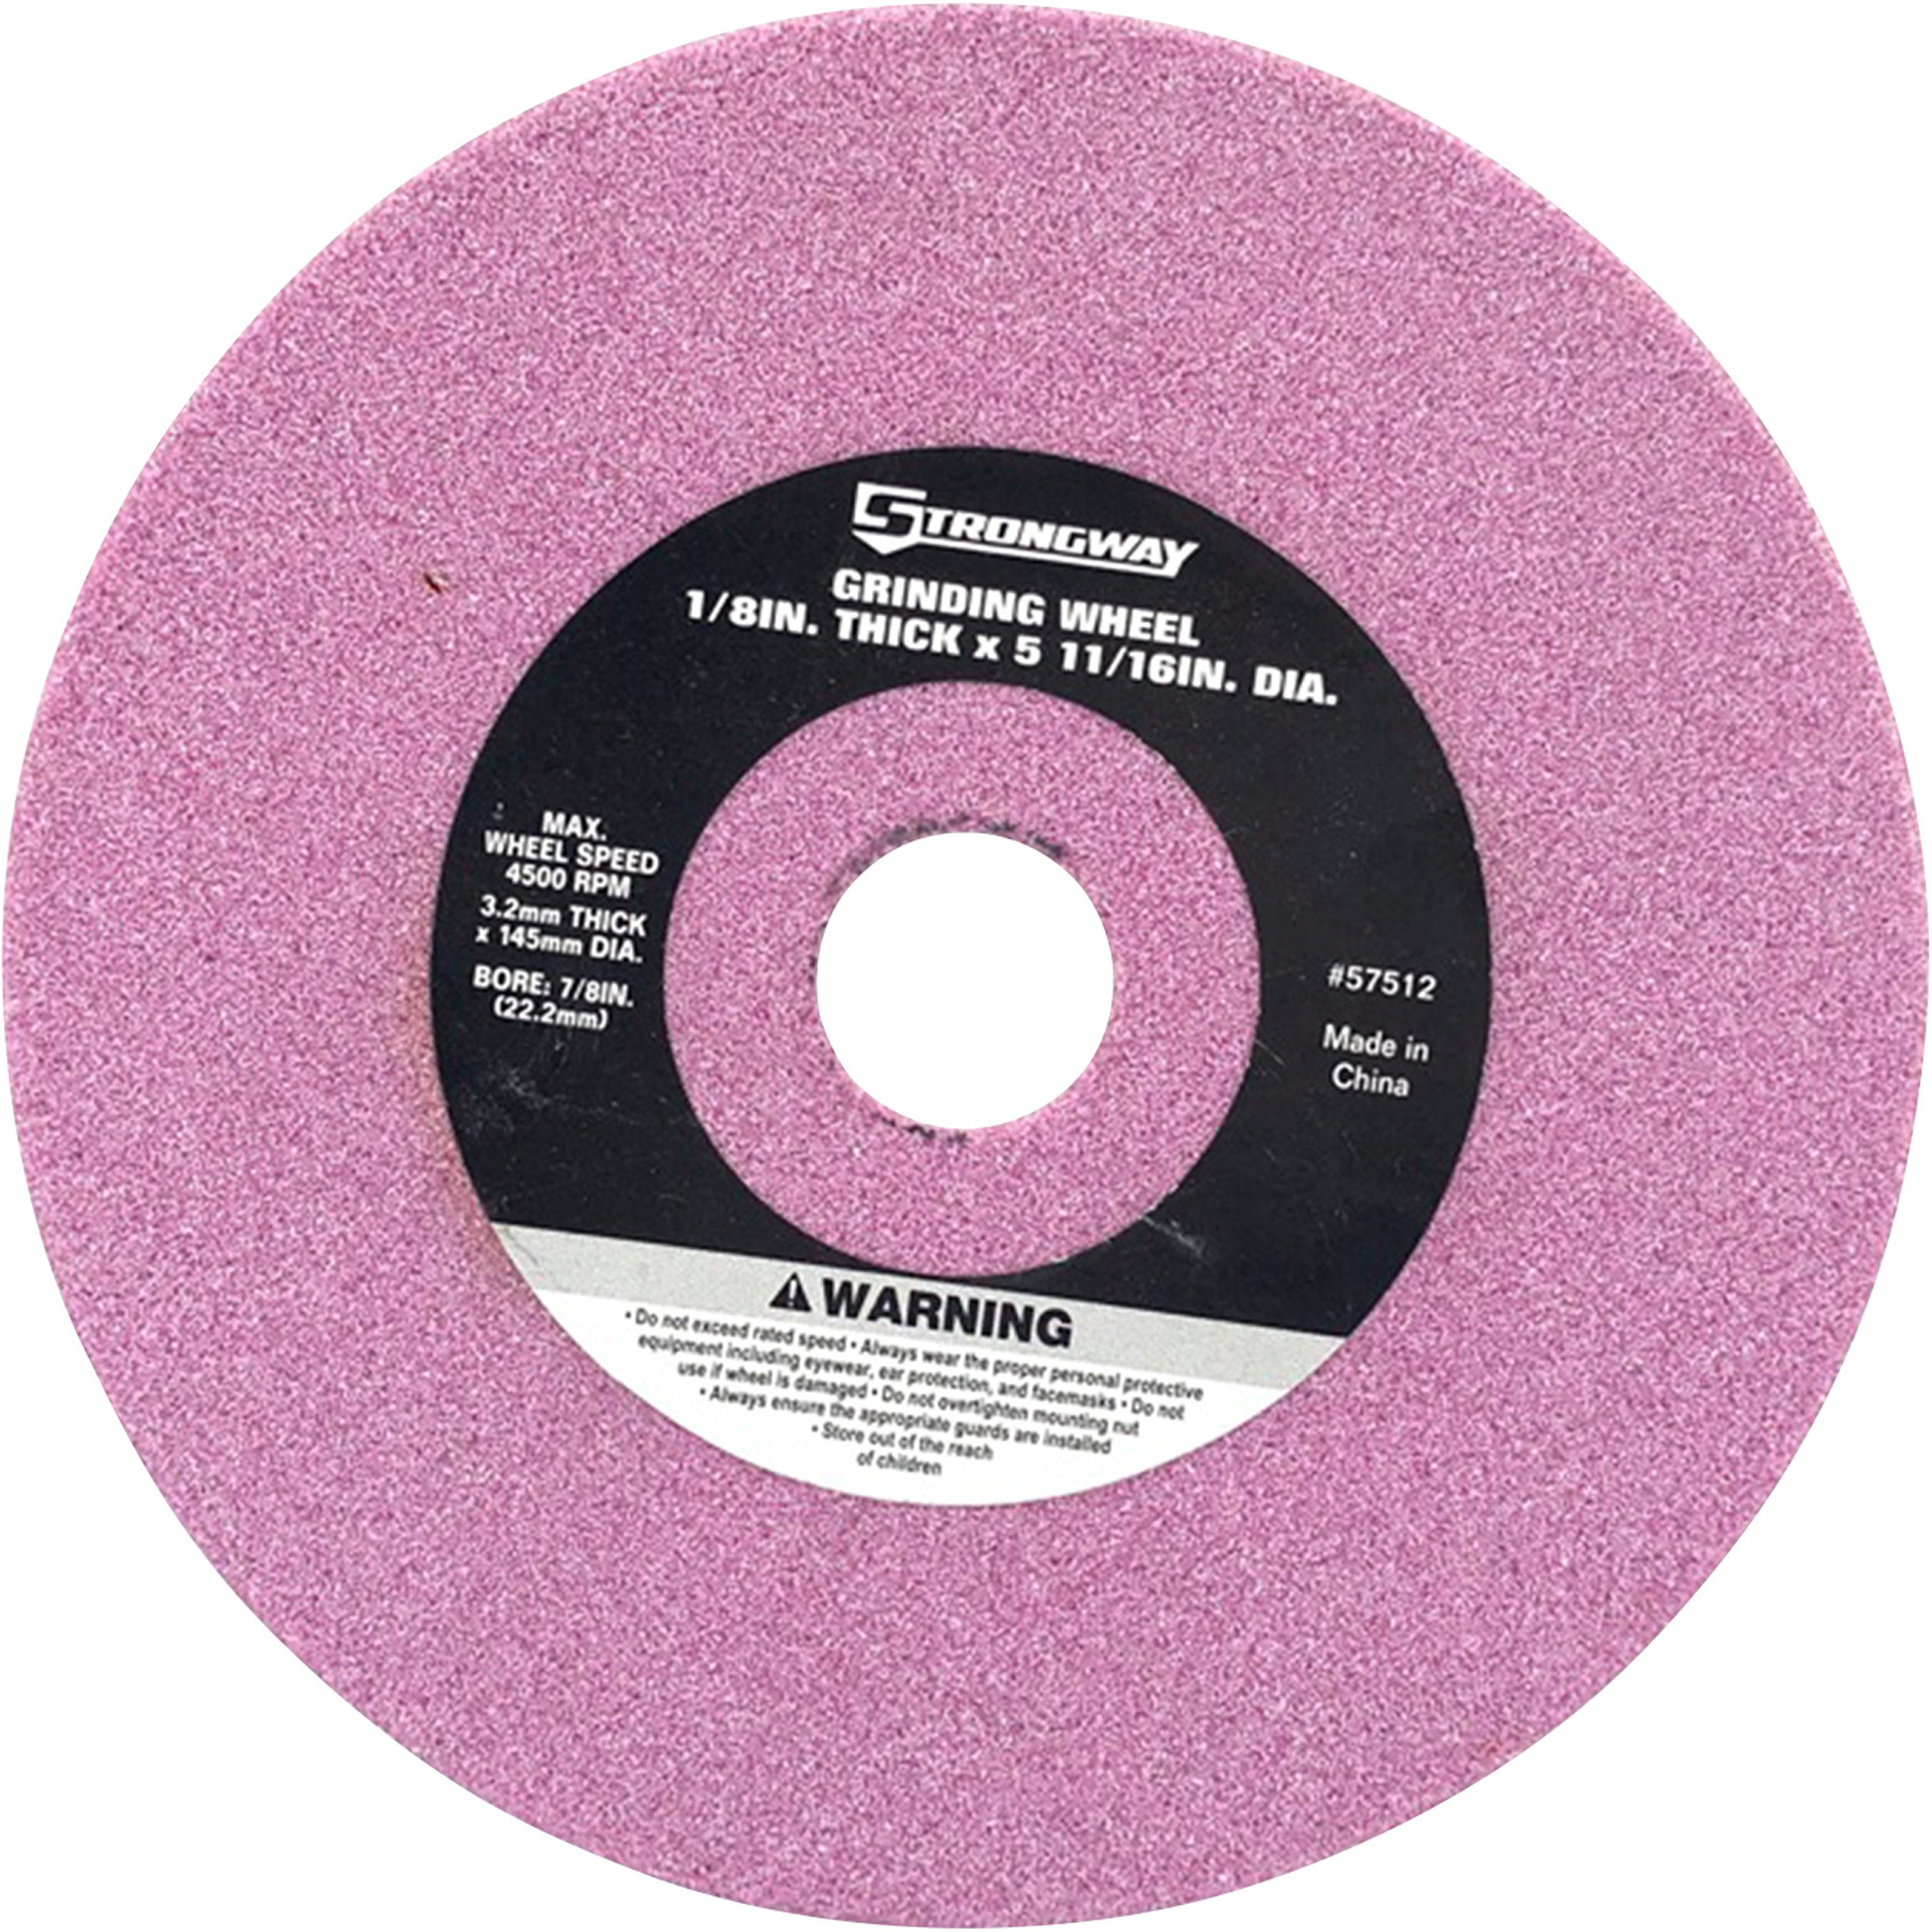 Strongway Grinding Wheel, 1/8Inch Thick x 5 11/16Inch Diameter